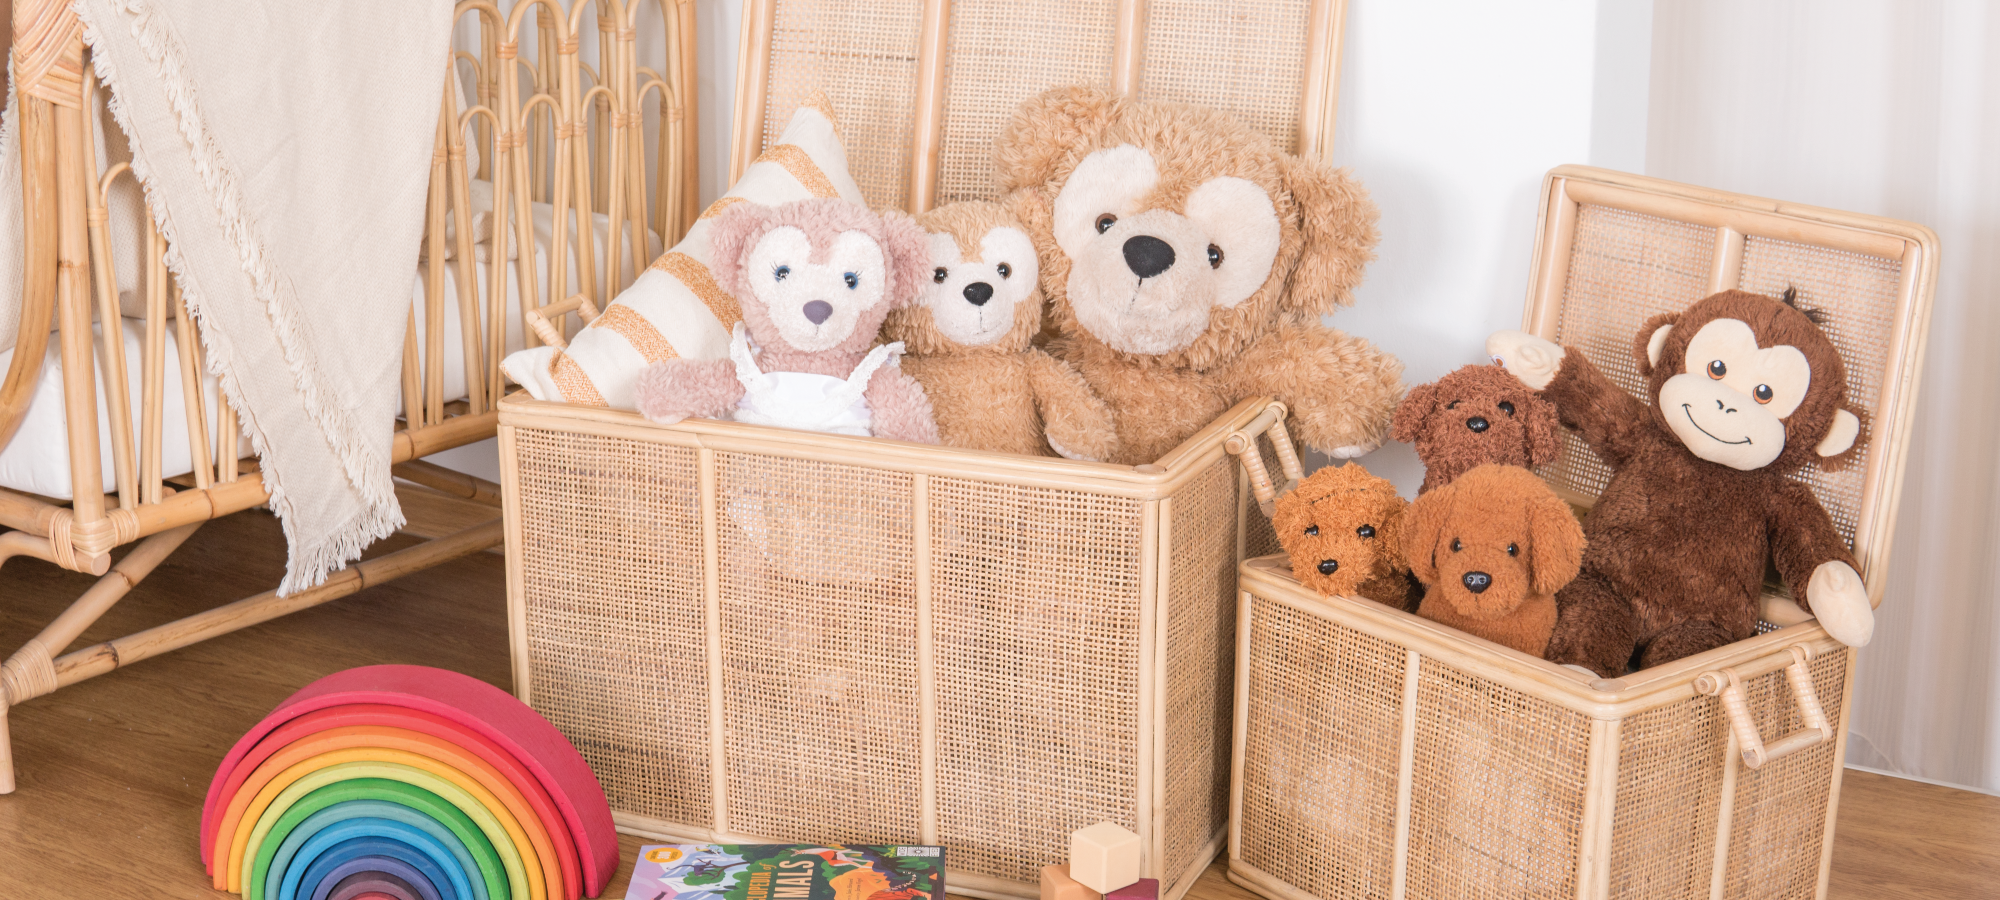 Rattan Storage Trunks | Kathy's Cove | Designed in Singapore | Shop Rattan Furniture and Rattan Toys online